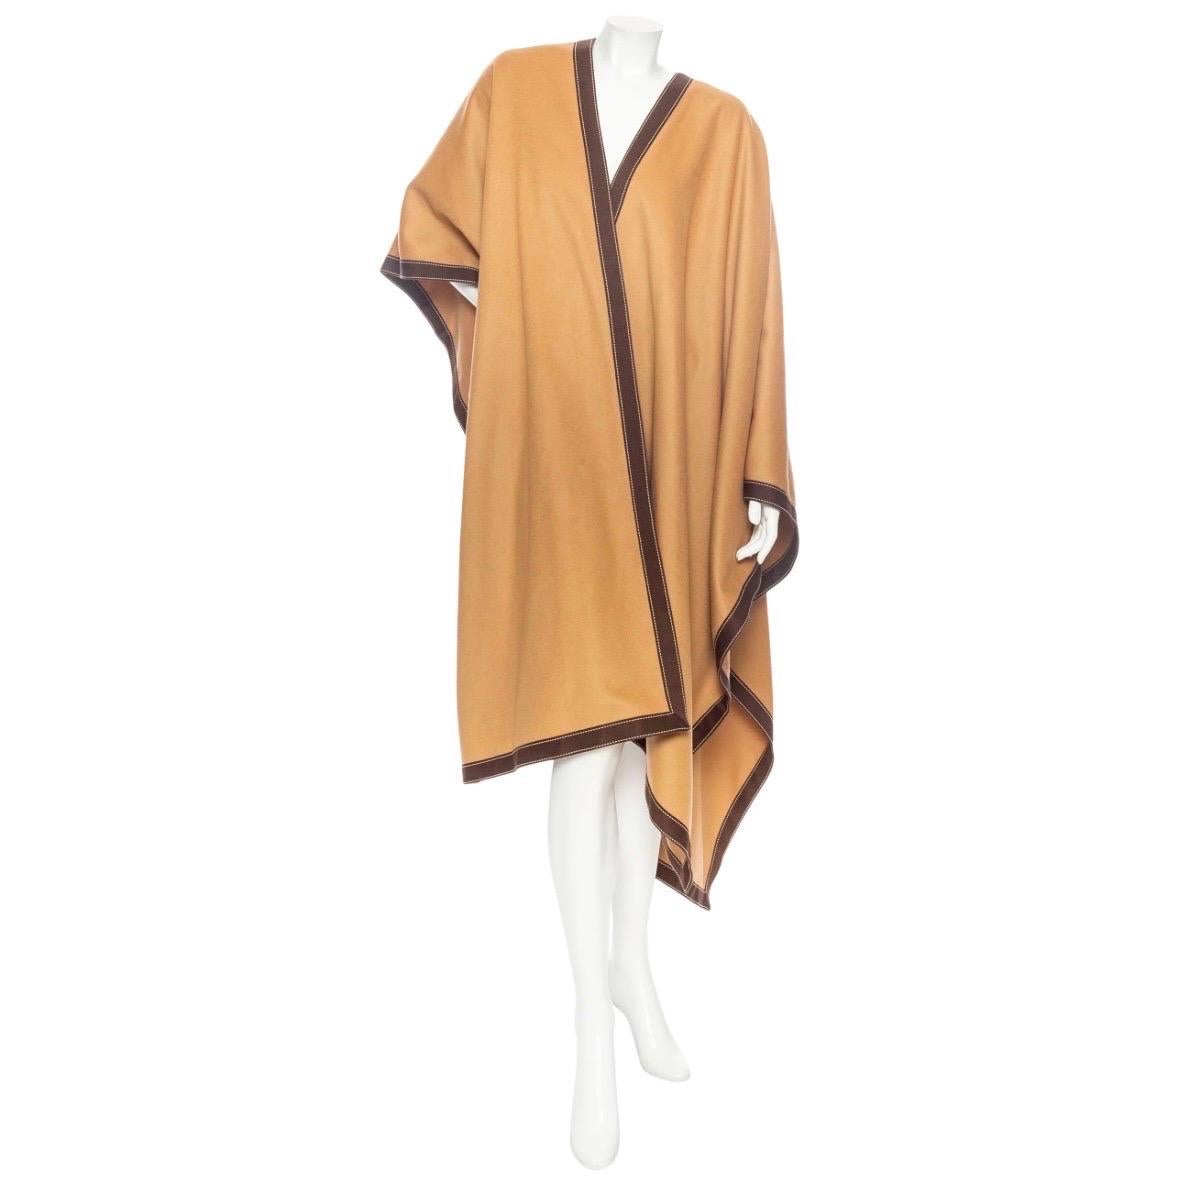 Balmain Camel Wool-Blend Contrast-Trim Draped Poncho Fall2020 In Excellent Condition For Sale In Los Angeles, CA